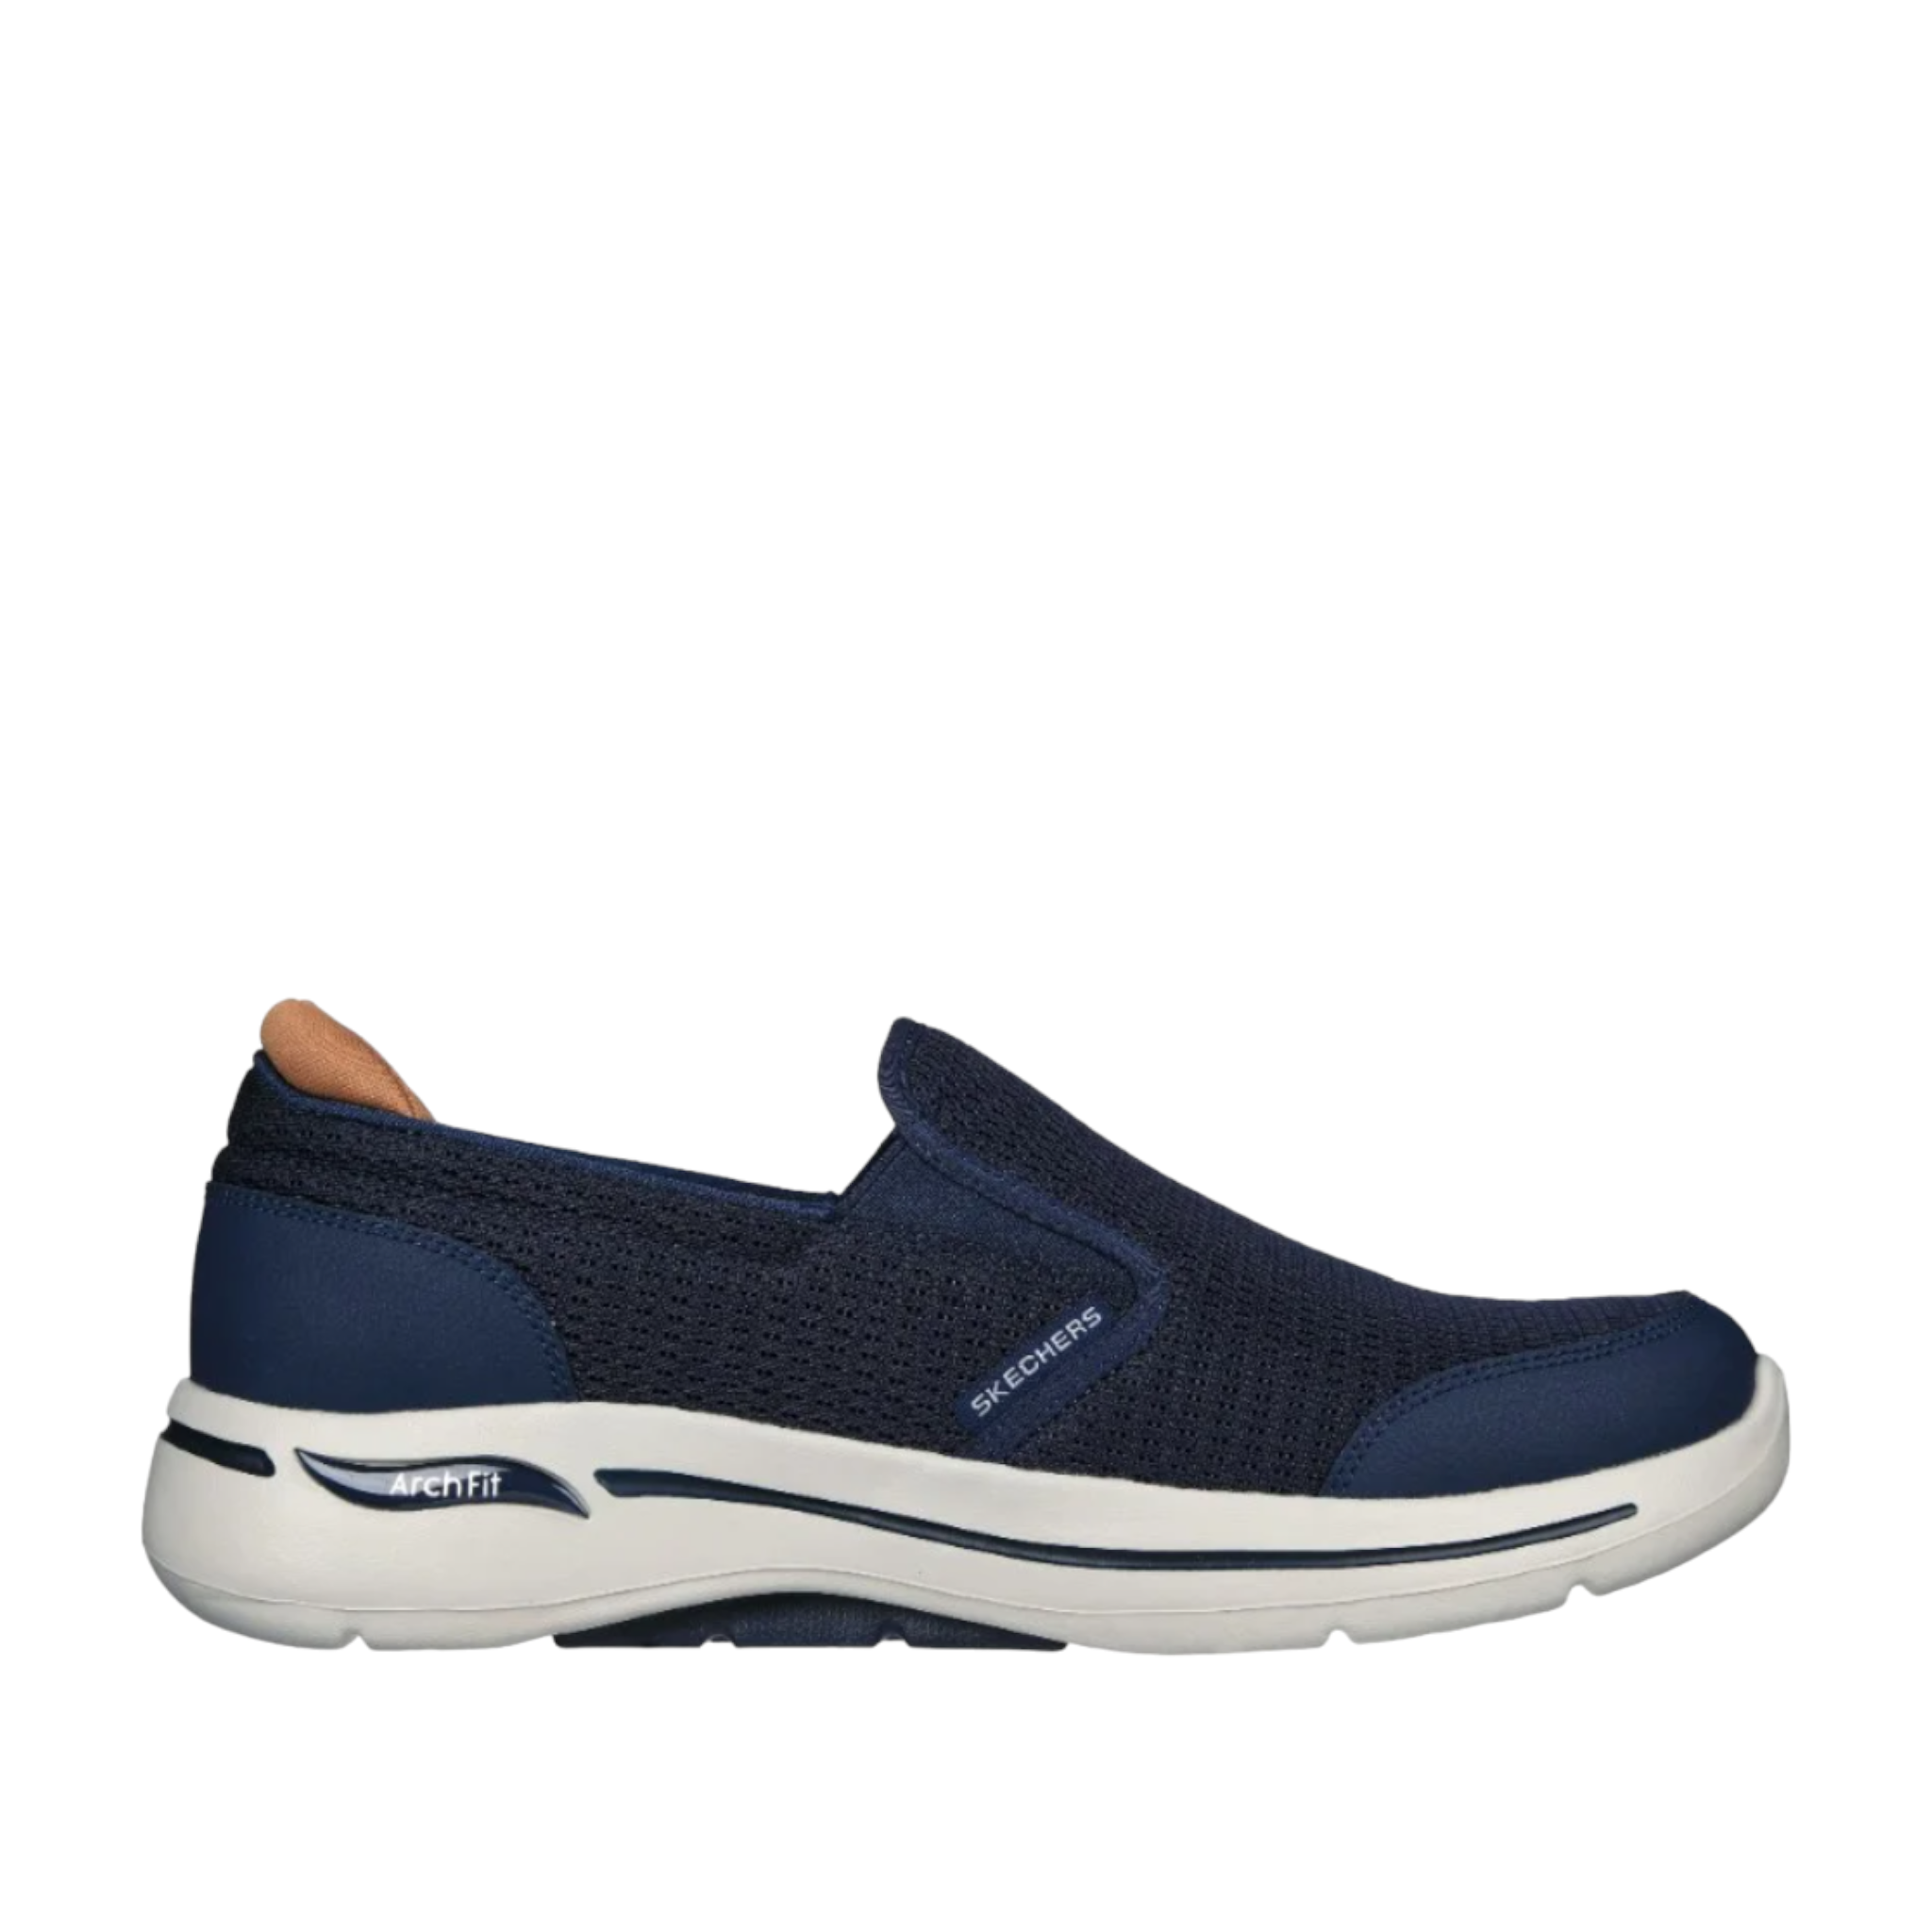 Shop Robust Comfort - with shoe&amp;me - from Skechers - Sneakers - Mens, Sneakers, Summer, Winter